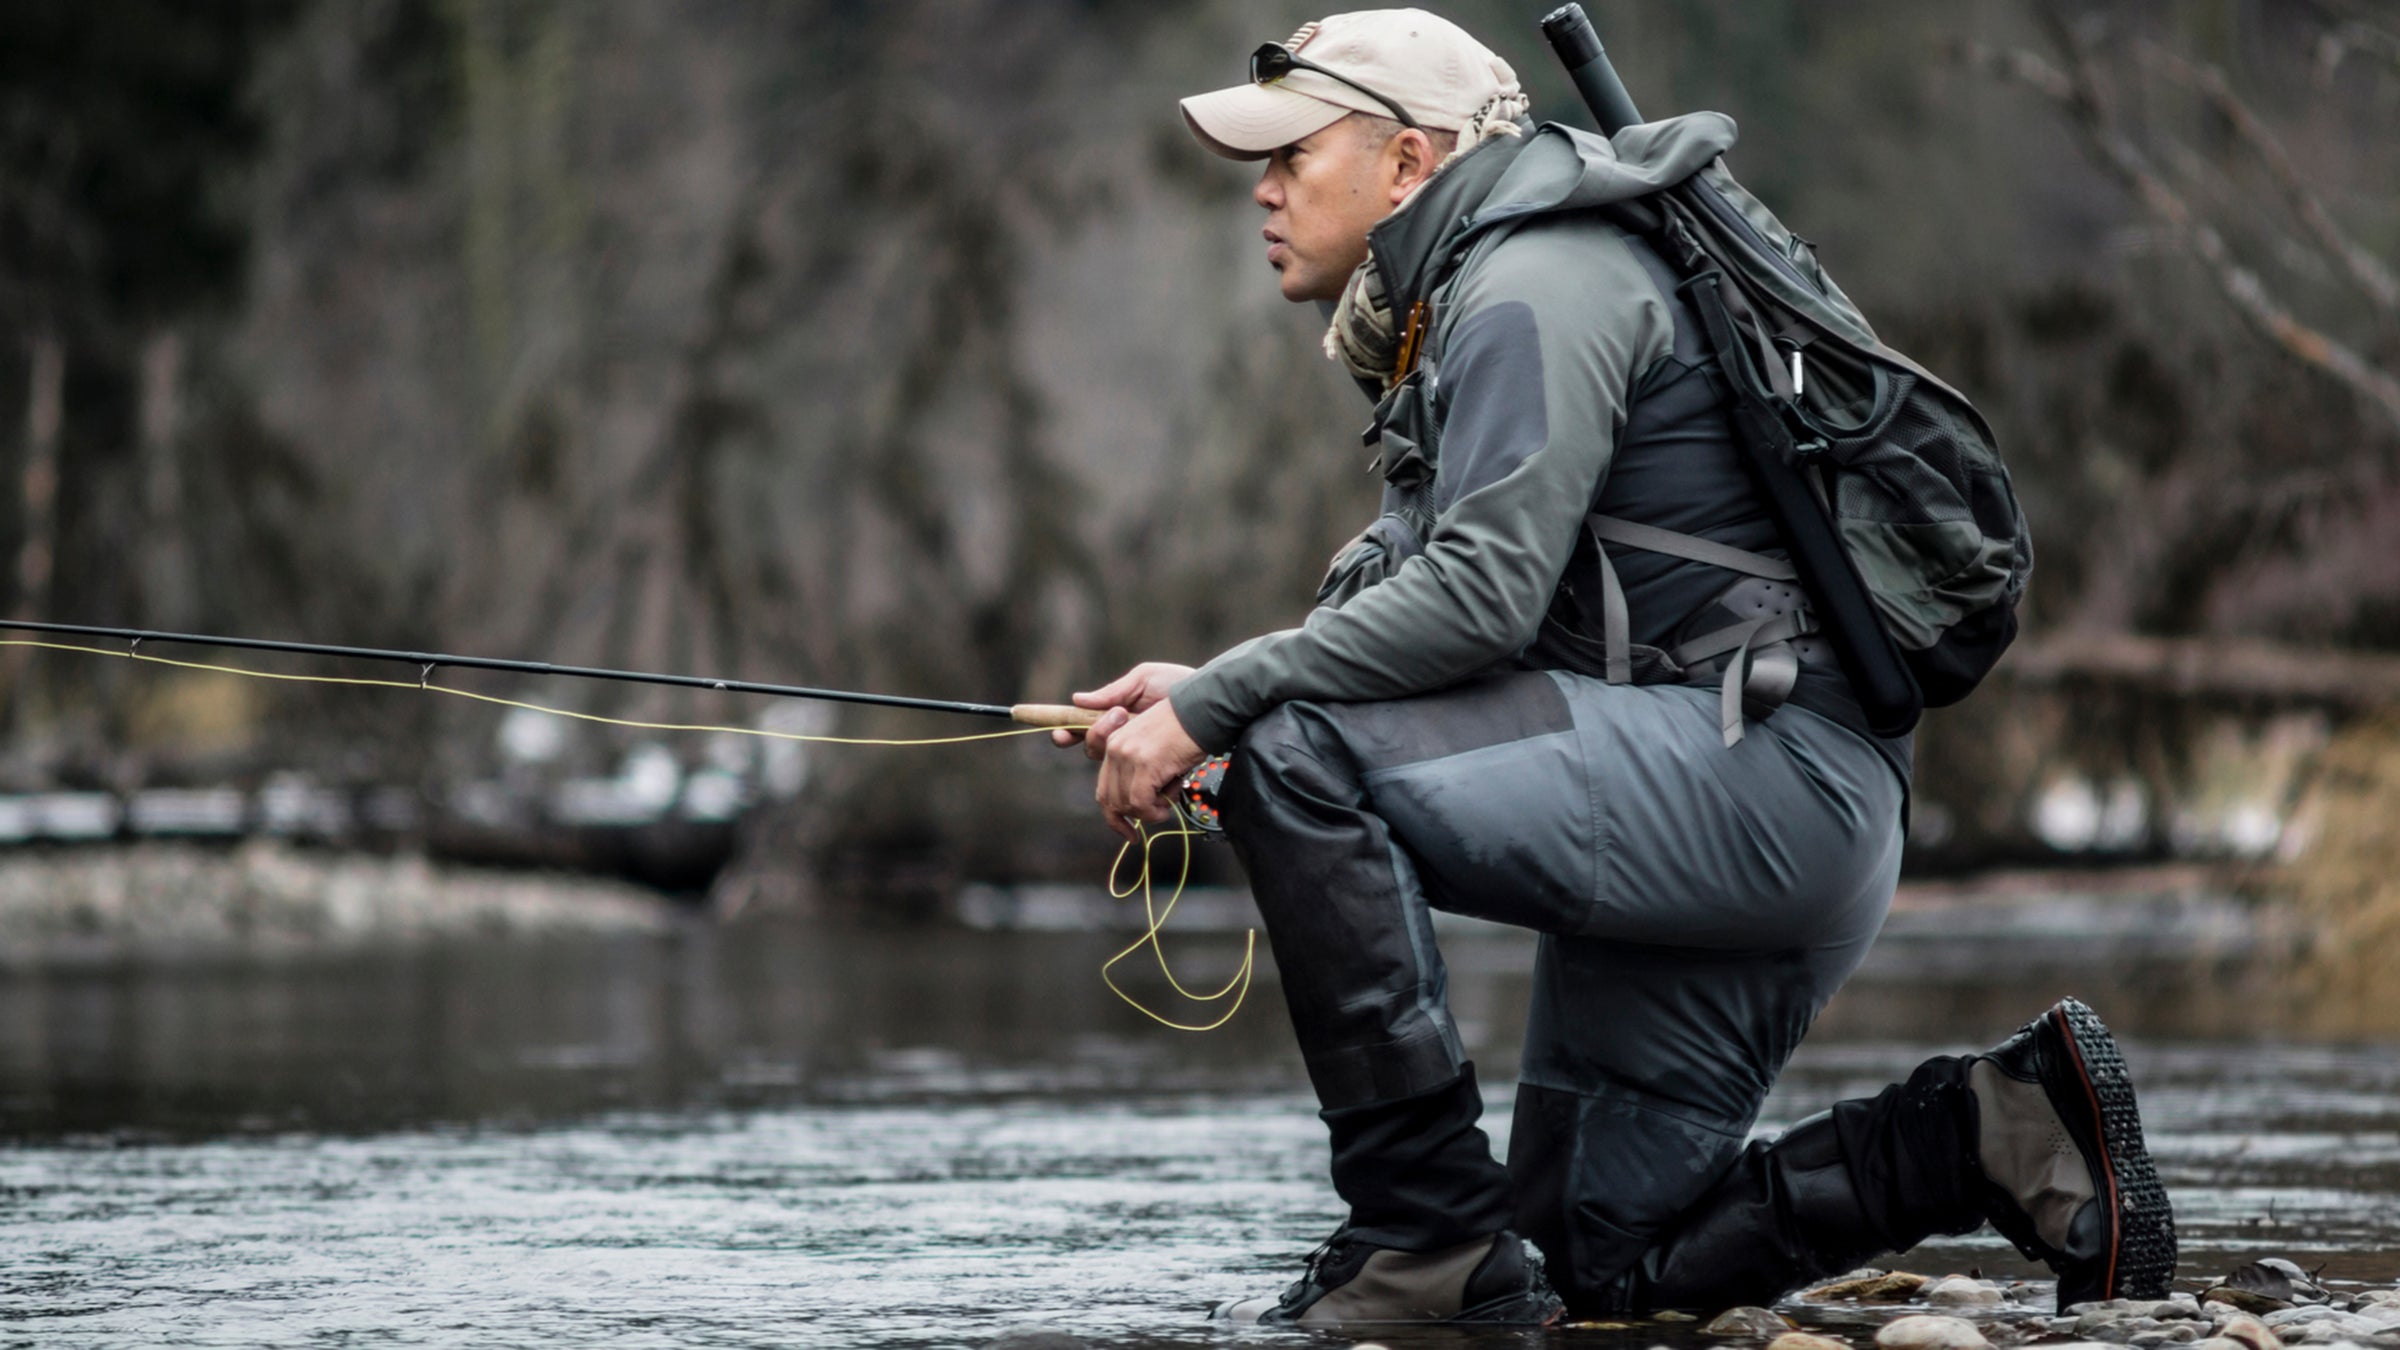 Gear Review  Rising Fly Fishing Tools 